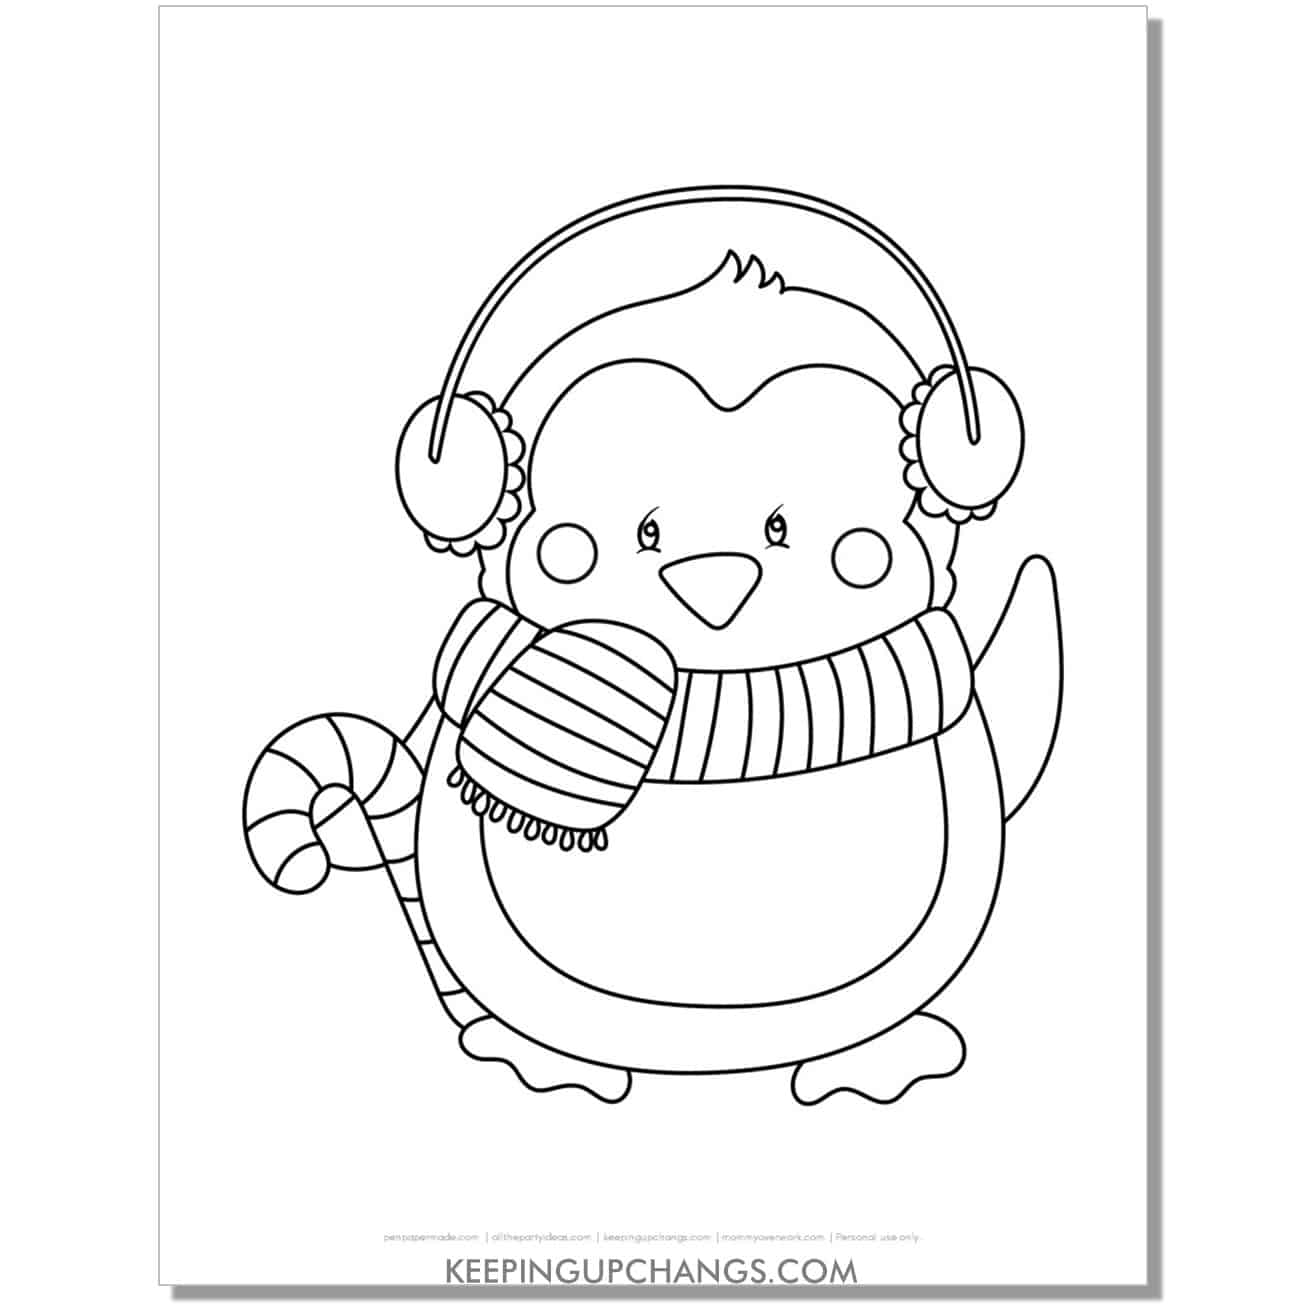 free fat penguin with ear muffs, scarf, candy cane coloring page.